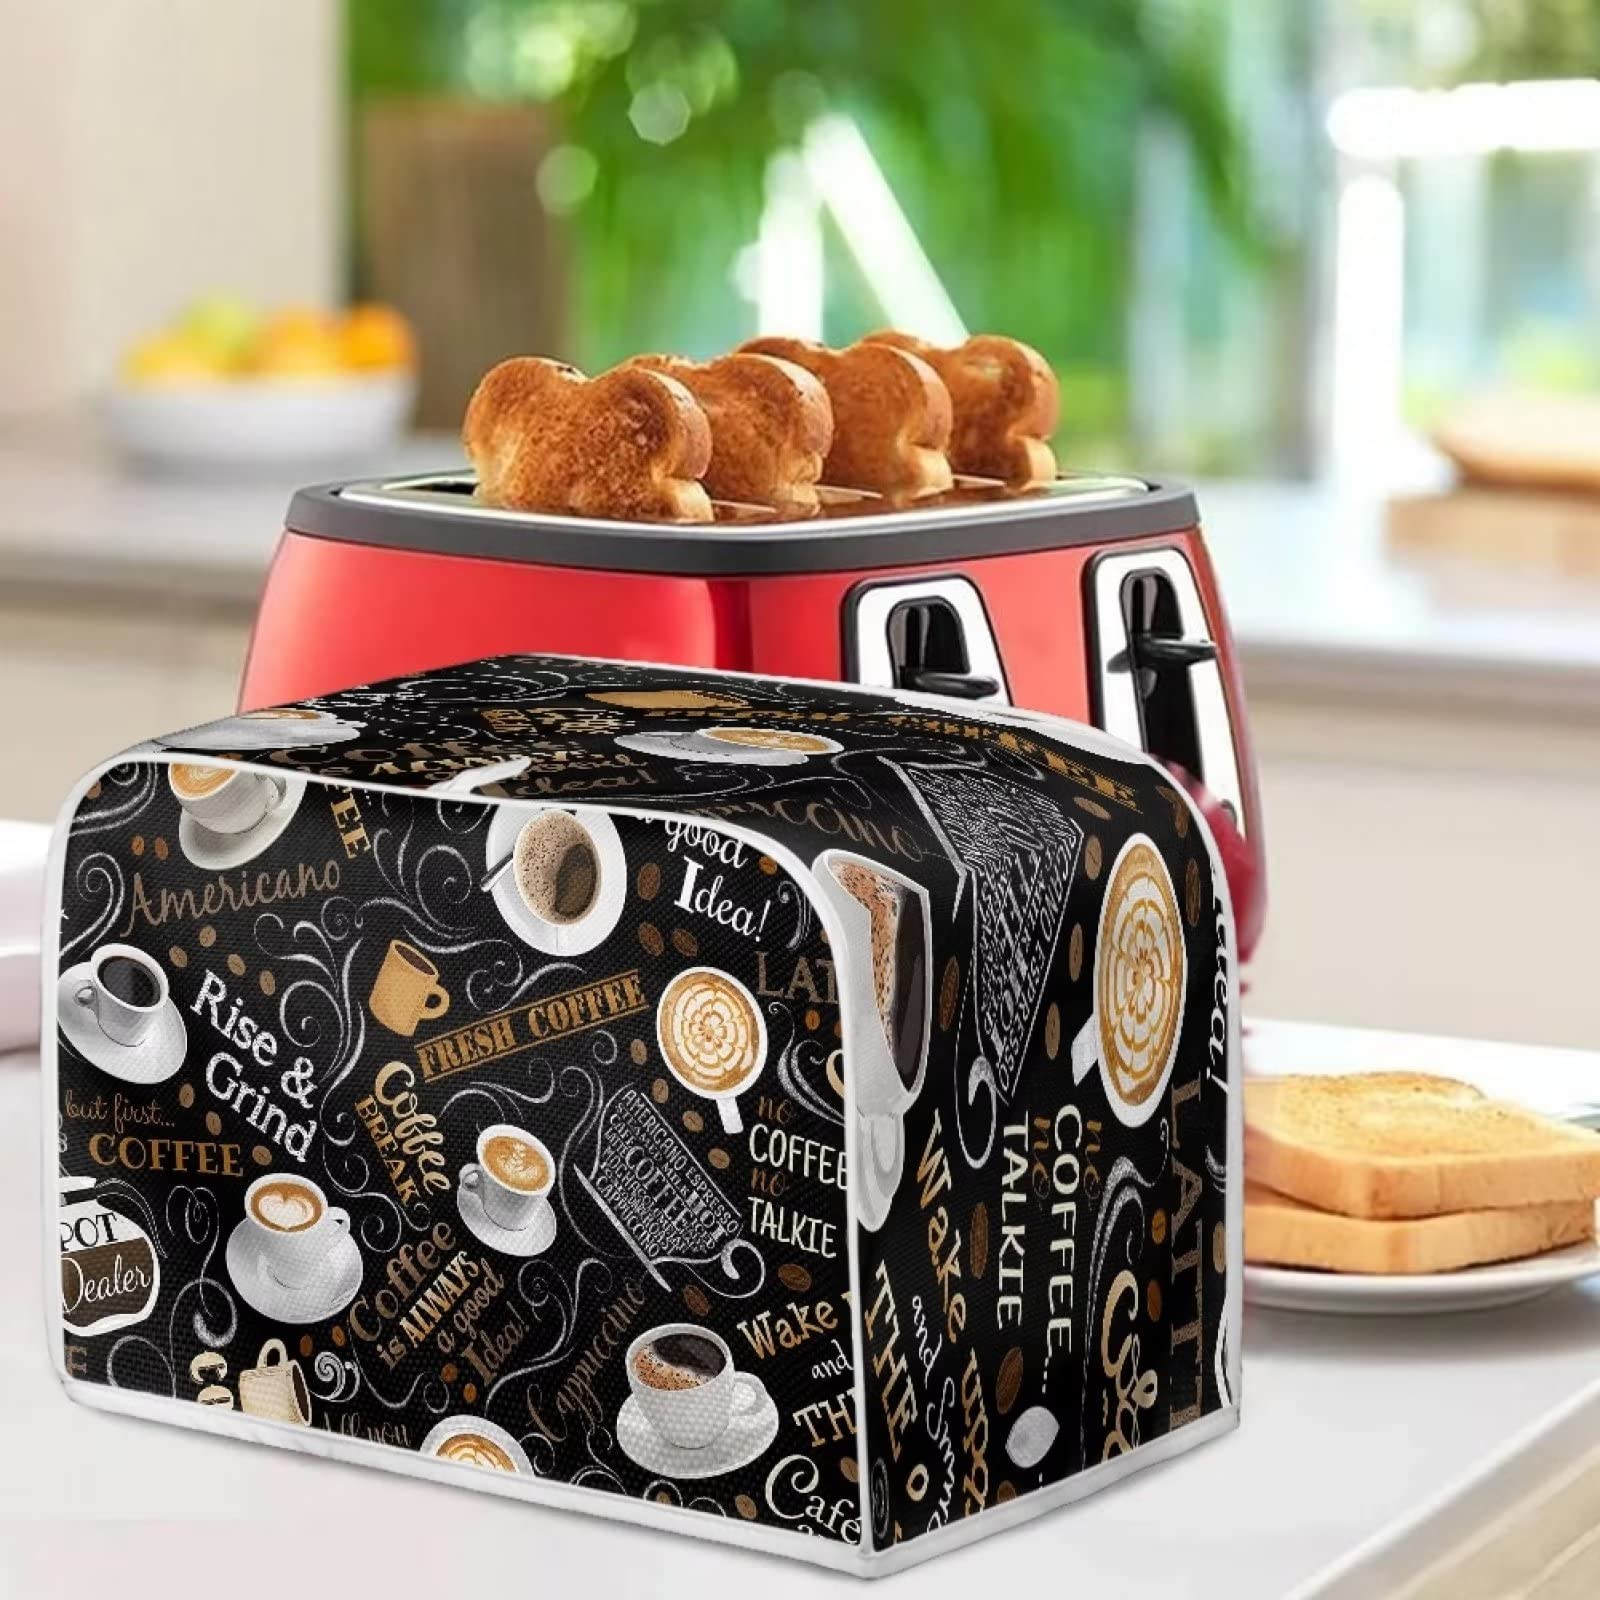 AFPANQZ Coffee Print Kitchen Toaster Covers Universal 4 Slice Bread Toaster Cover Protection Stain Resistant Dustproof Bread Maker Covers